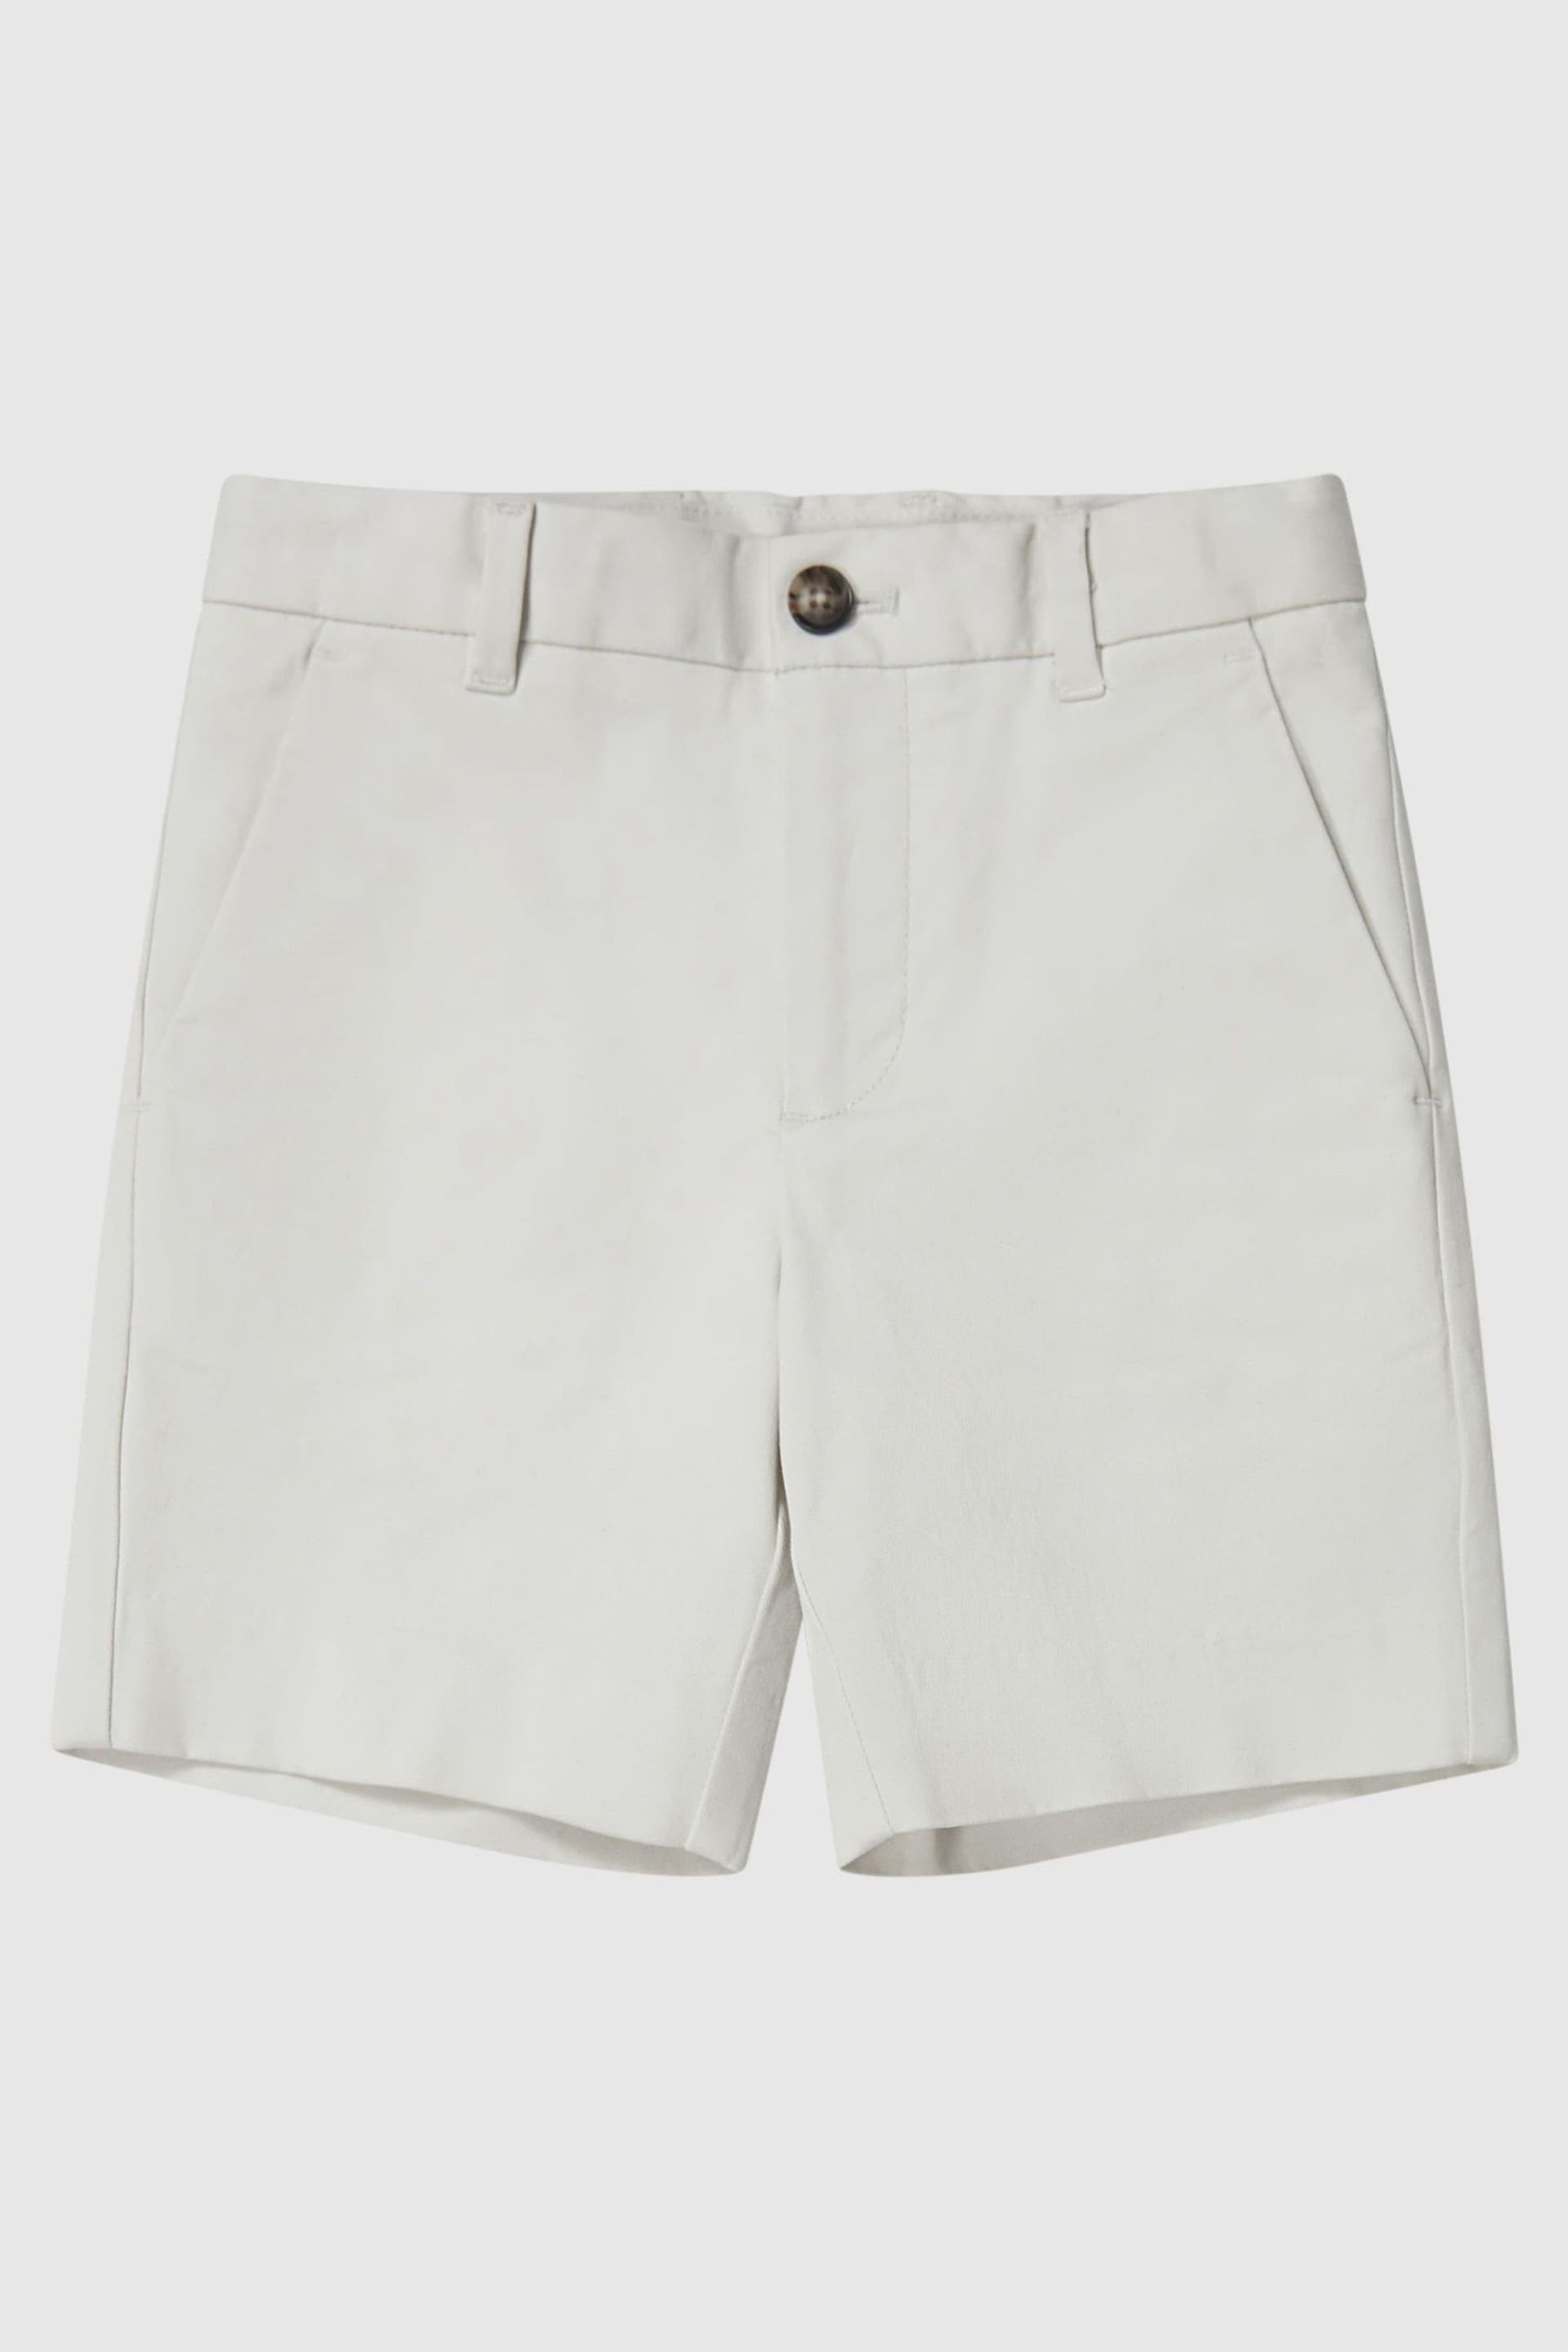 Reiss Chalk Wicket Junior Casual Chino Shorts - Image 2 of 6